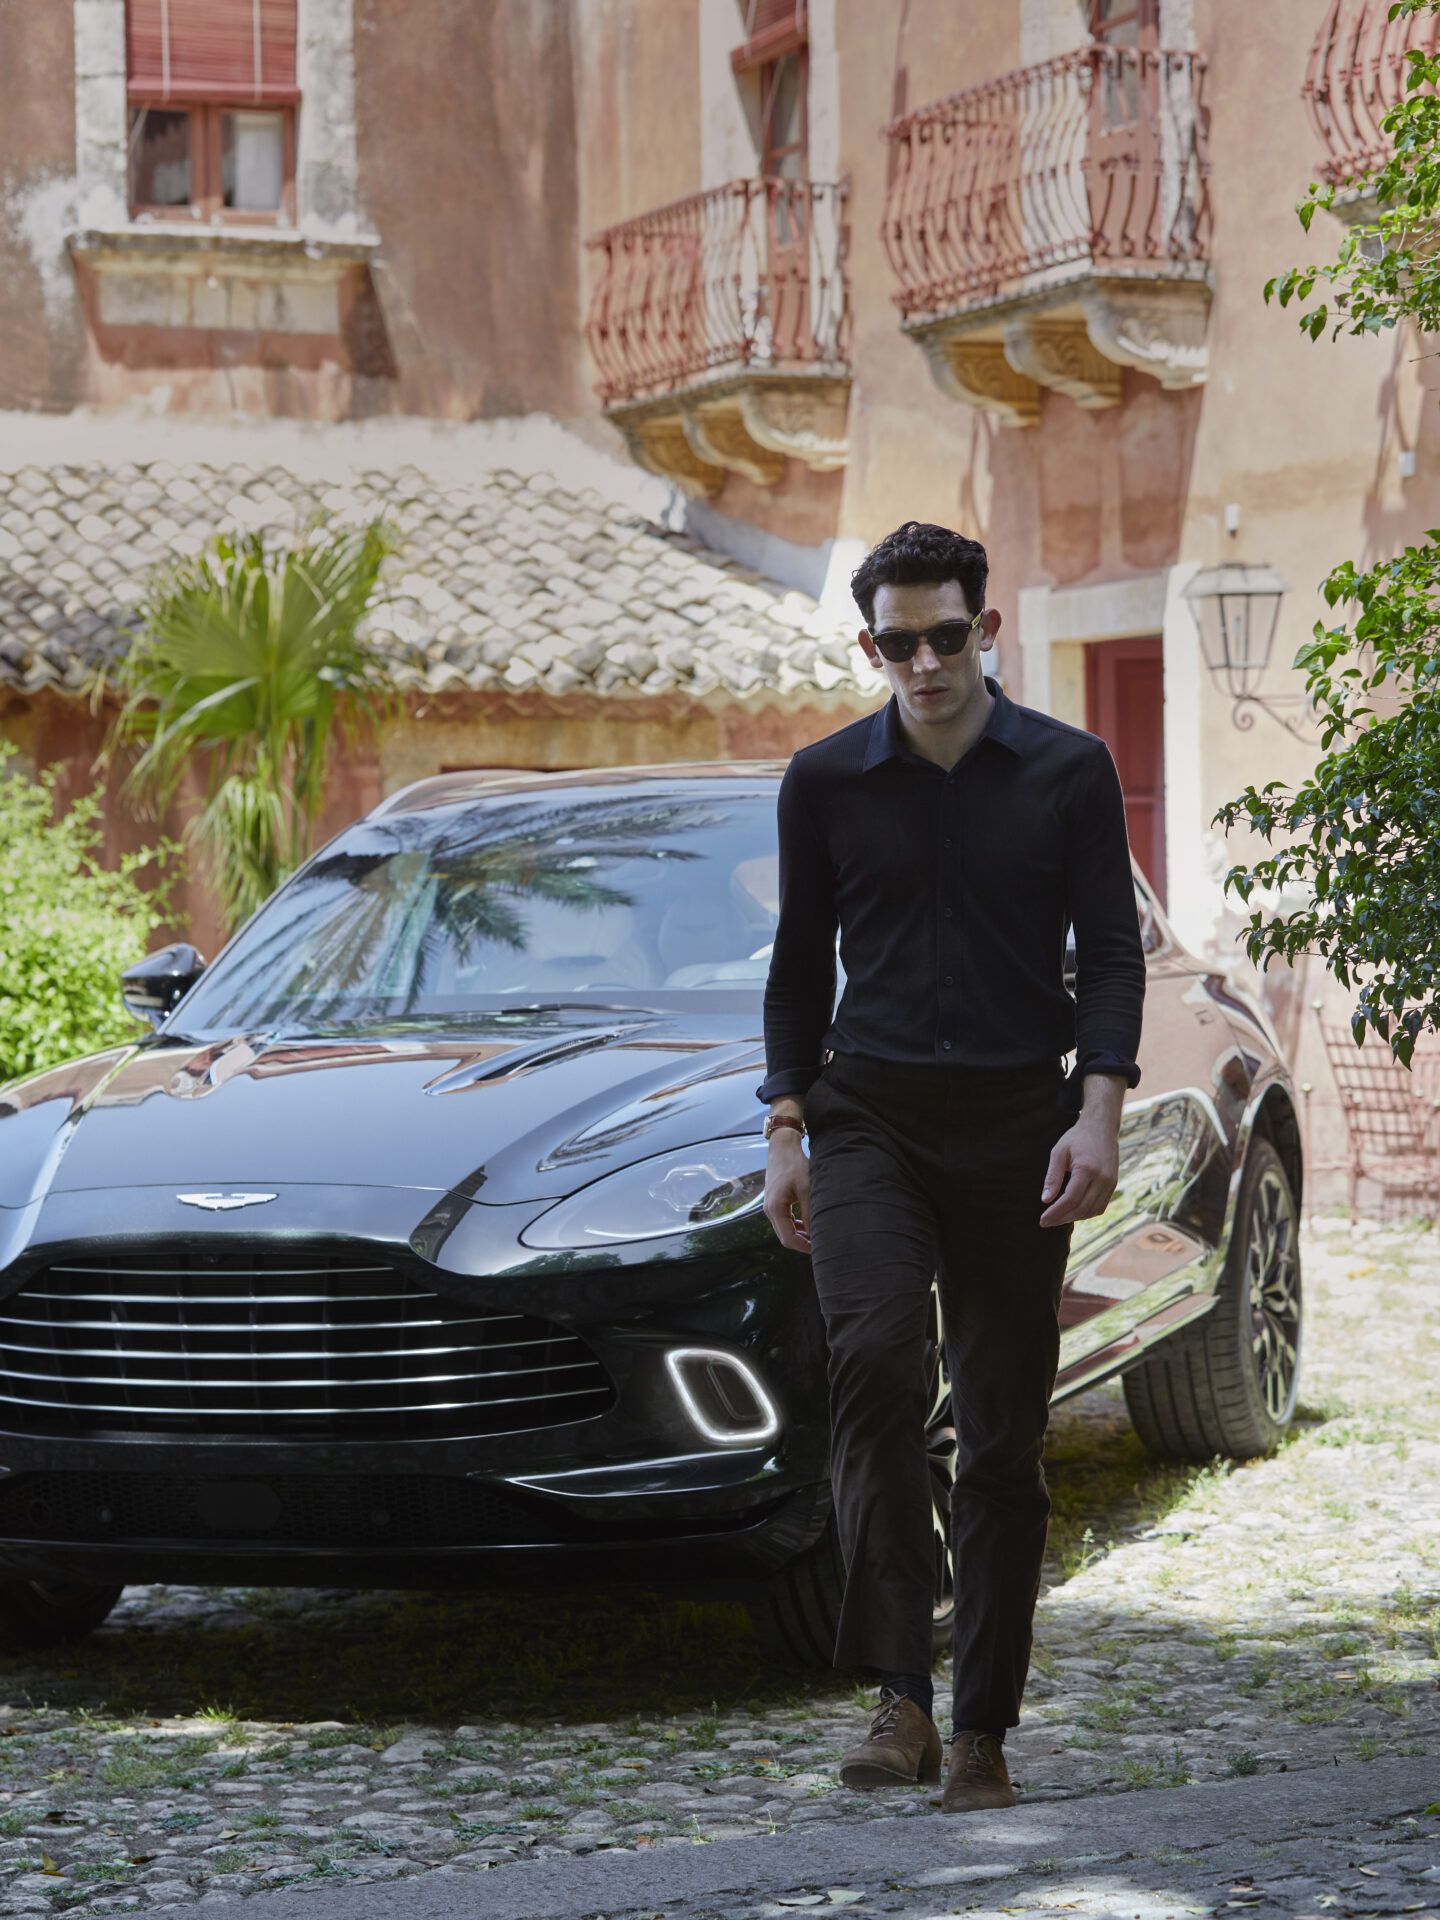 Aston Martin's Debut SUV Is Announced With A Luca Guadagnino Directed Film Starring Josh O'Connor